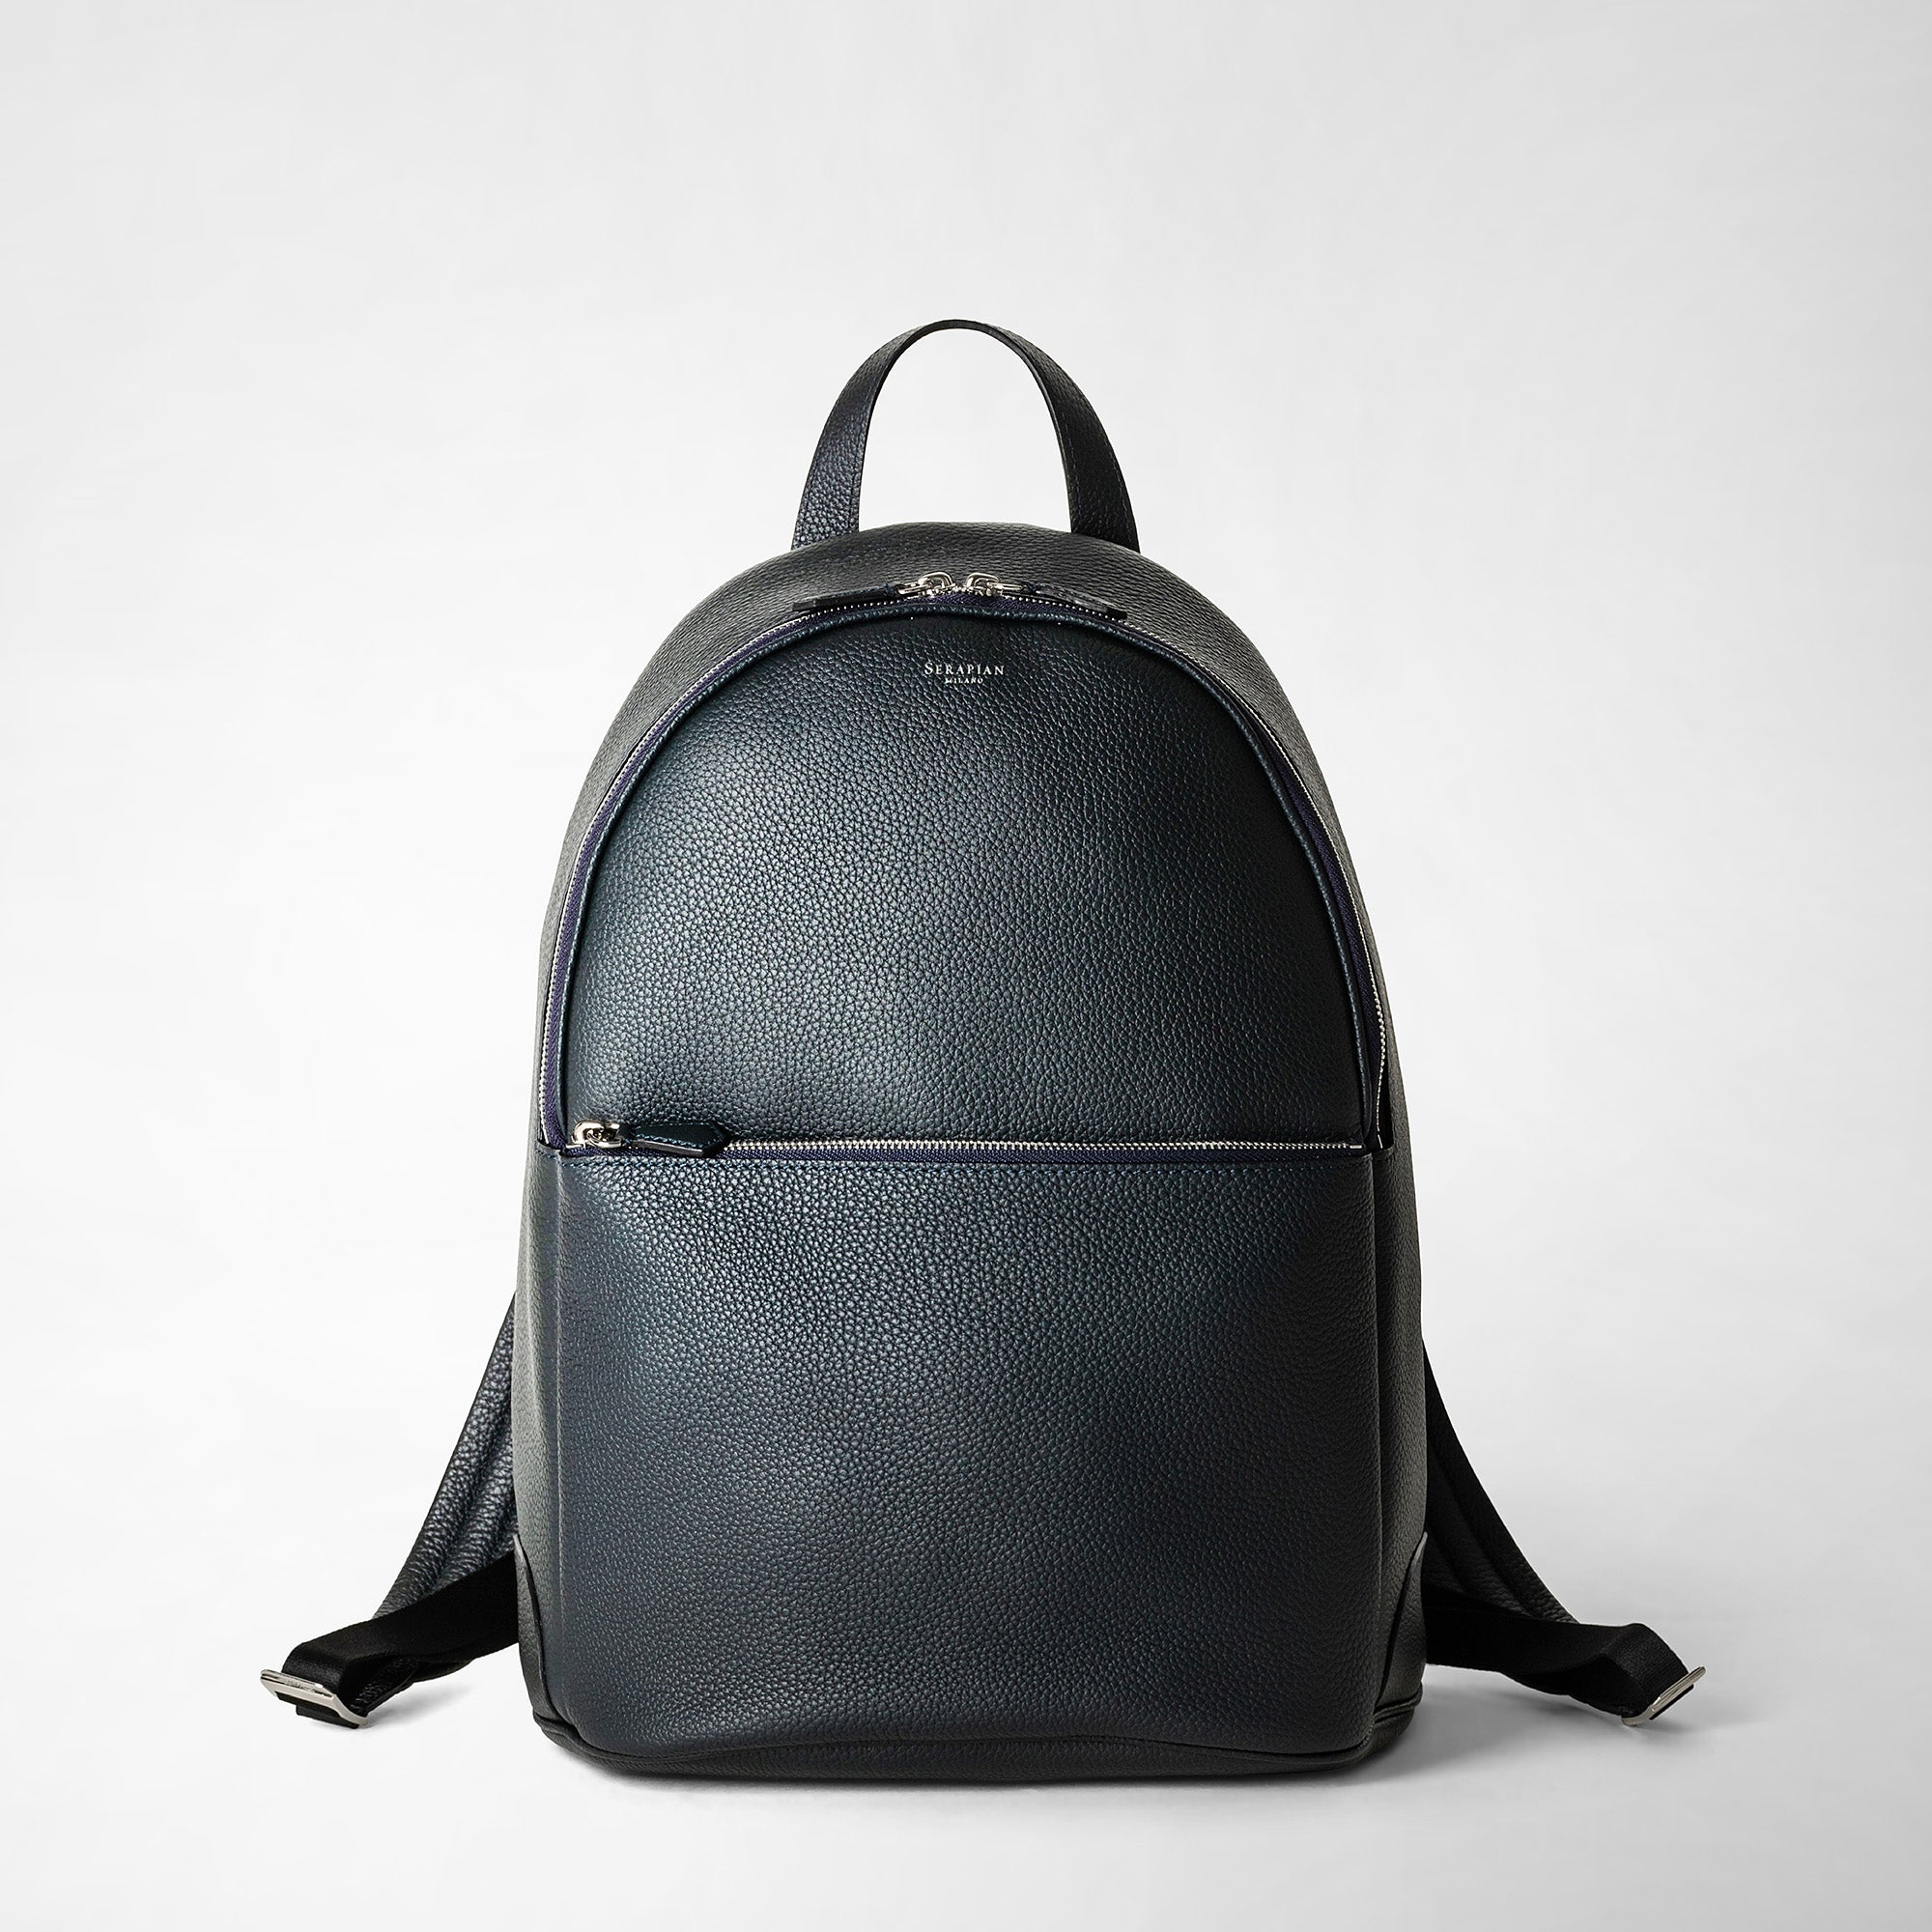 Backpack in cachemire leather navy blue – Serapian Boutique Online